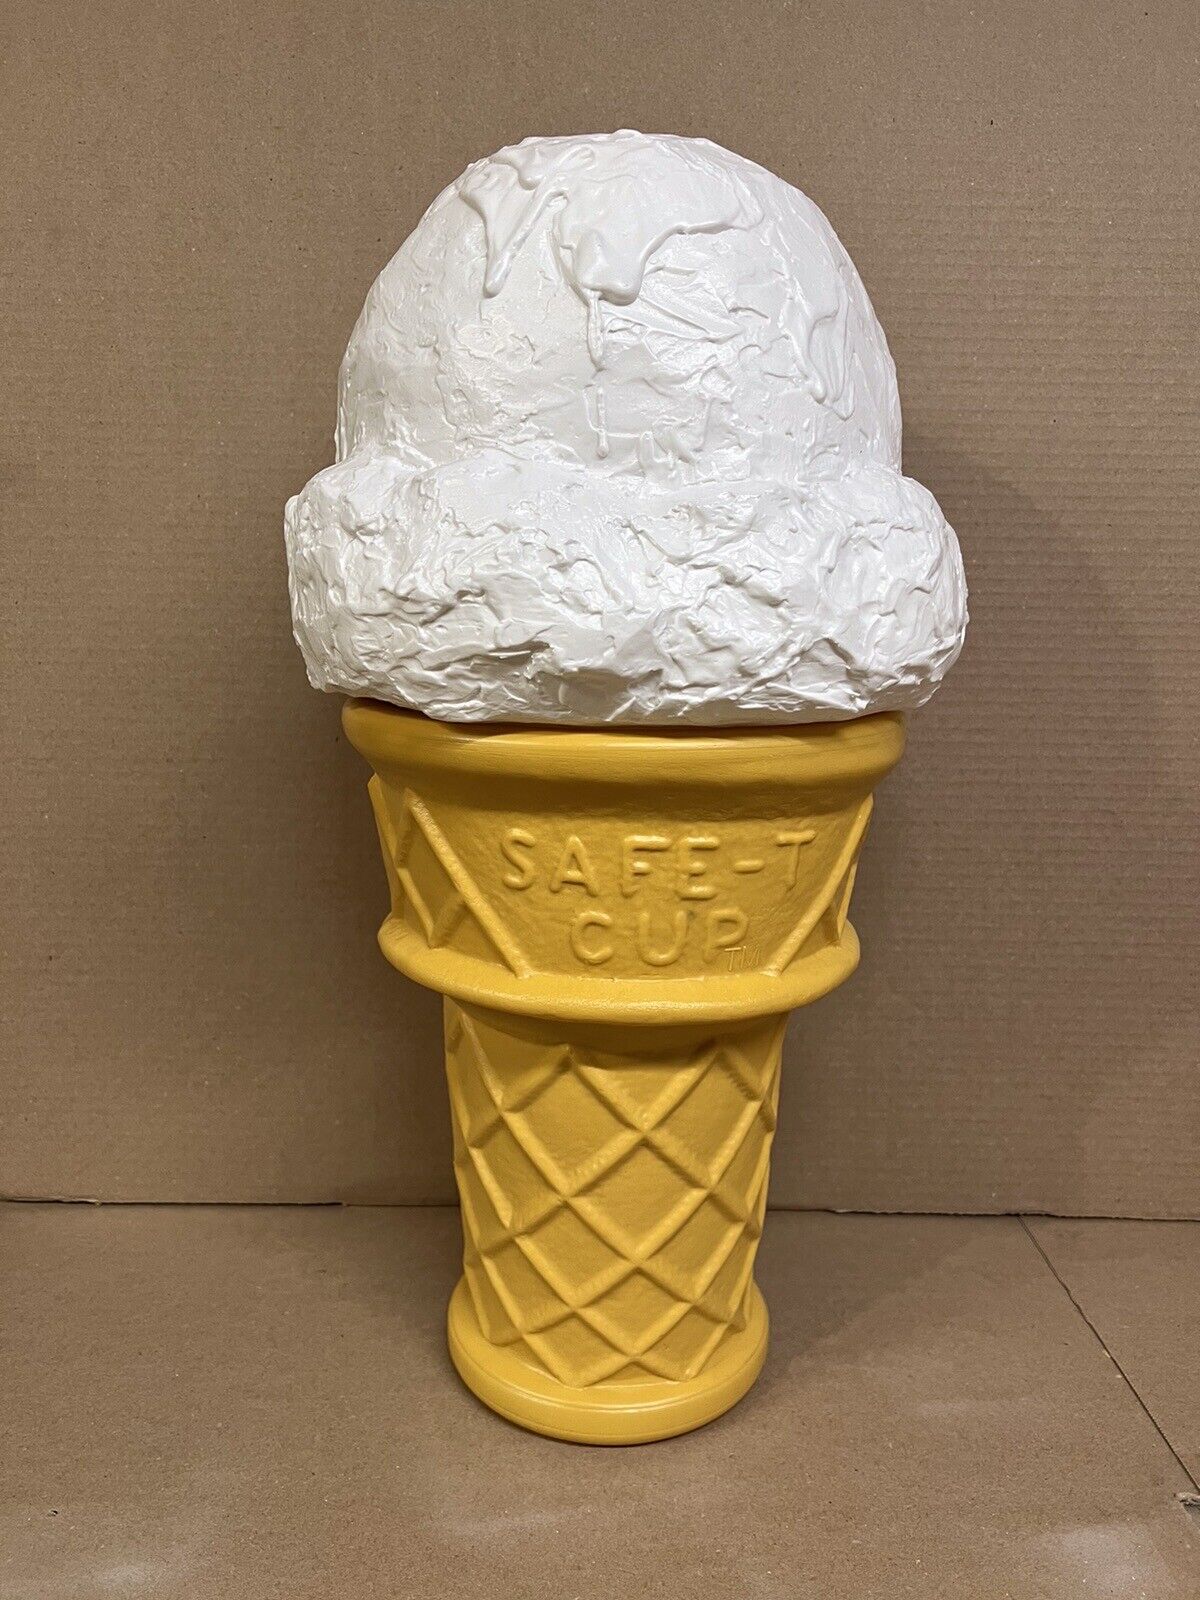 Blow Mold Giant Plastic Ice Cream Cone Display Vanilla SCOOP Safe T Cup LIGHTED